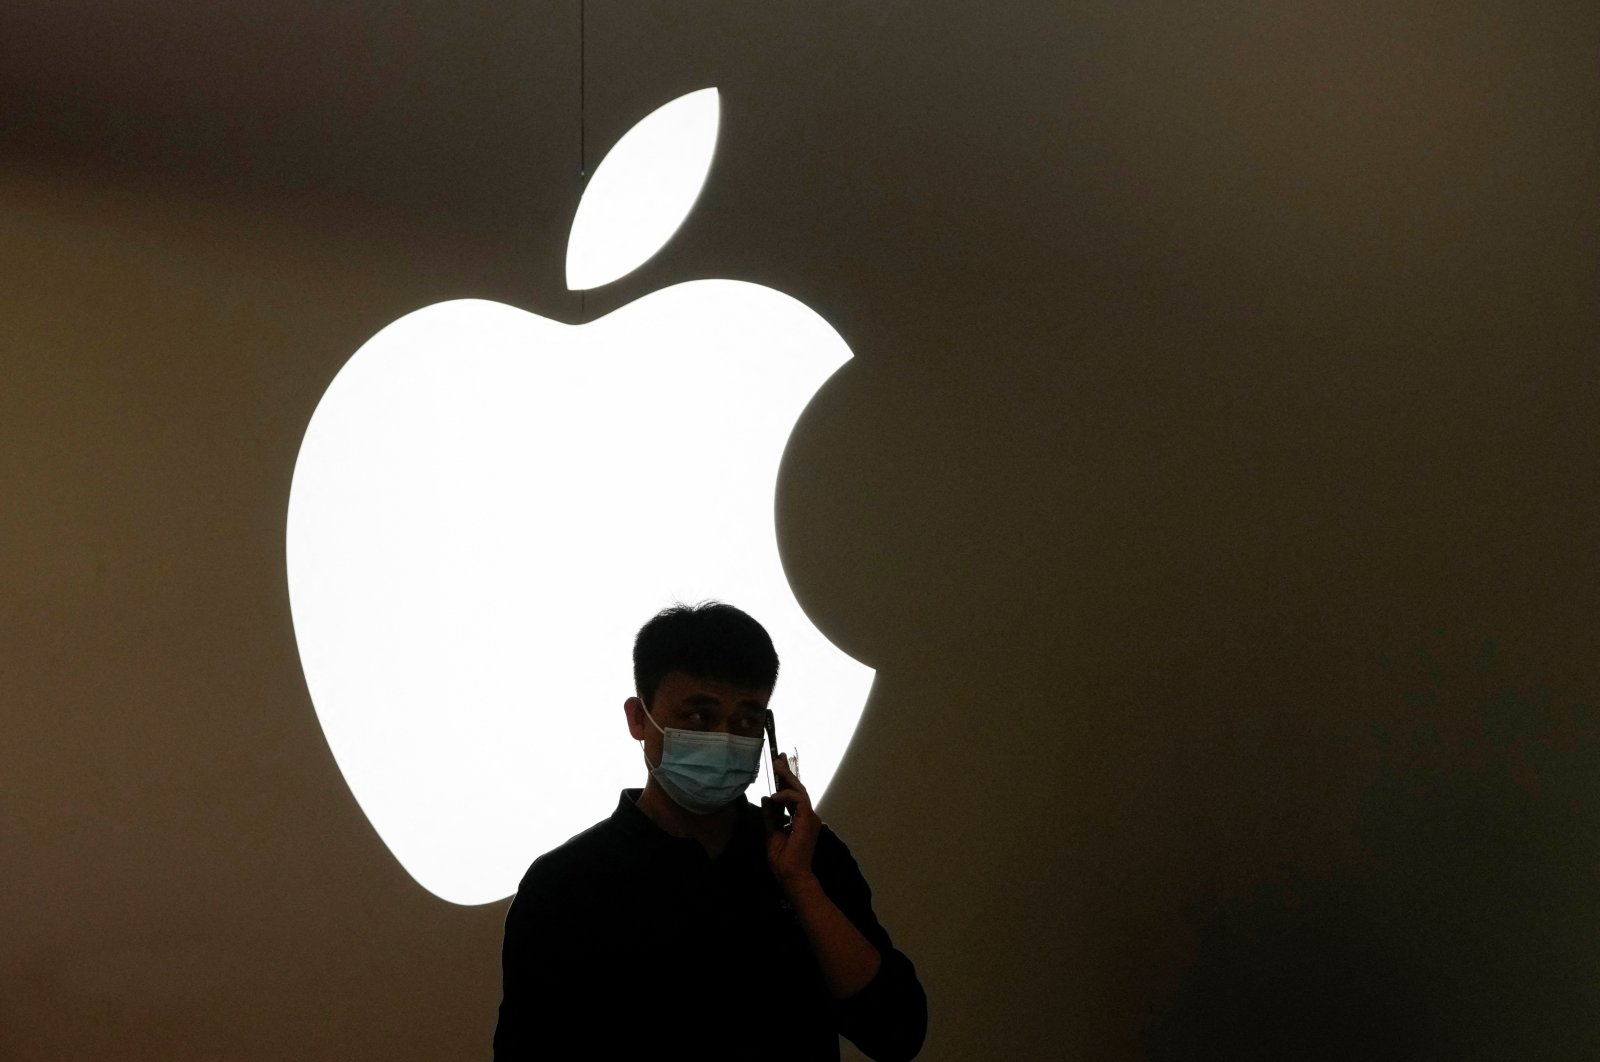 A man talks on a phone in front of an Apple logo outside the Apple store following the COVID-19 outbreak in Shanghai, China, Nov. 7, 2022. (Reuters Photo)